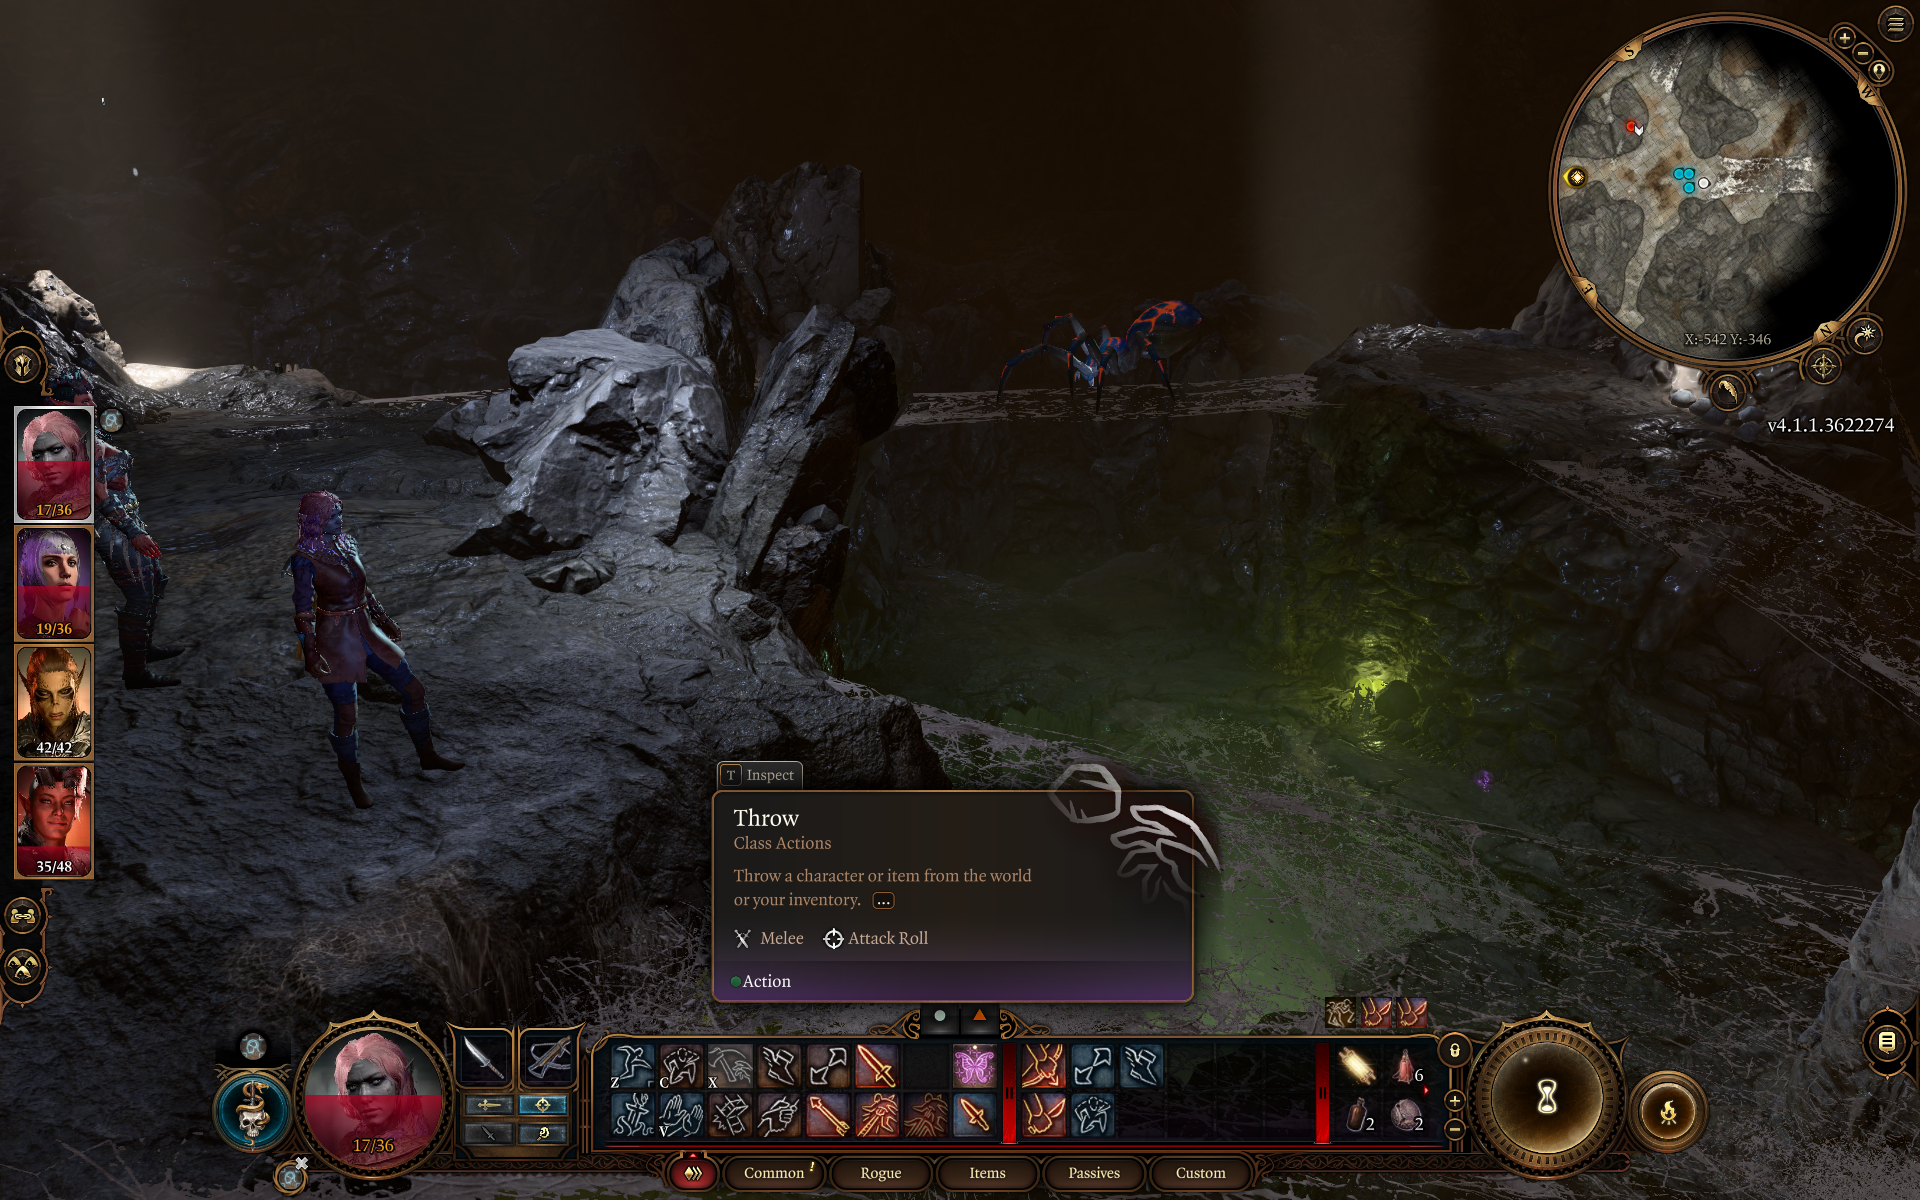 Baldur's Gate 3 players can miss out on a climactic battle in Act